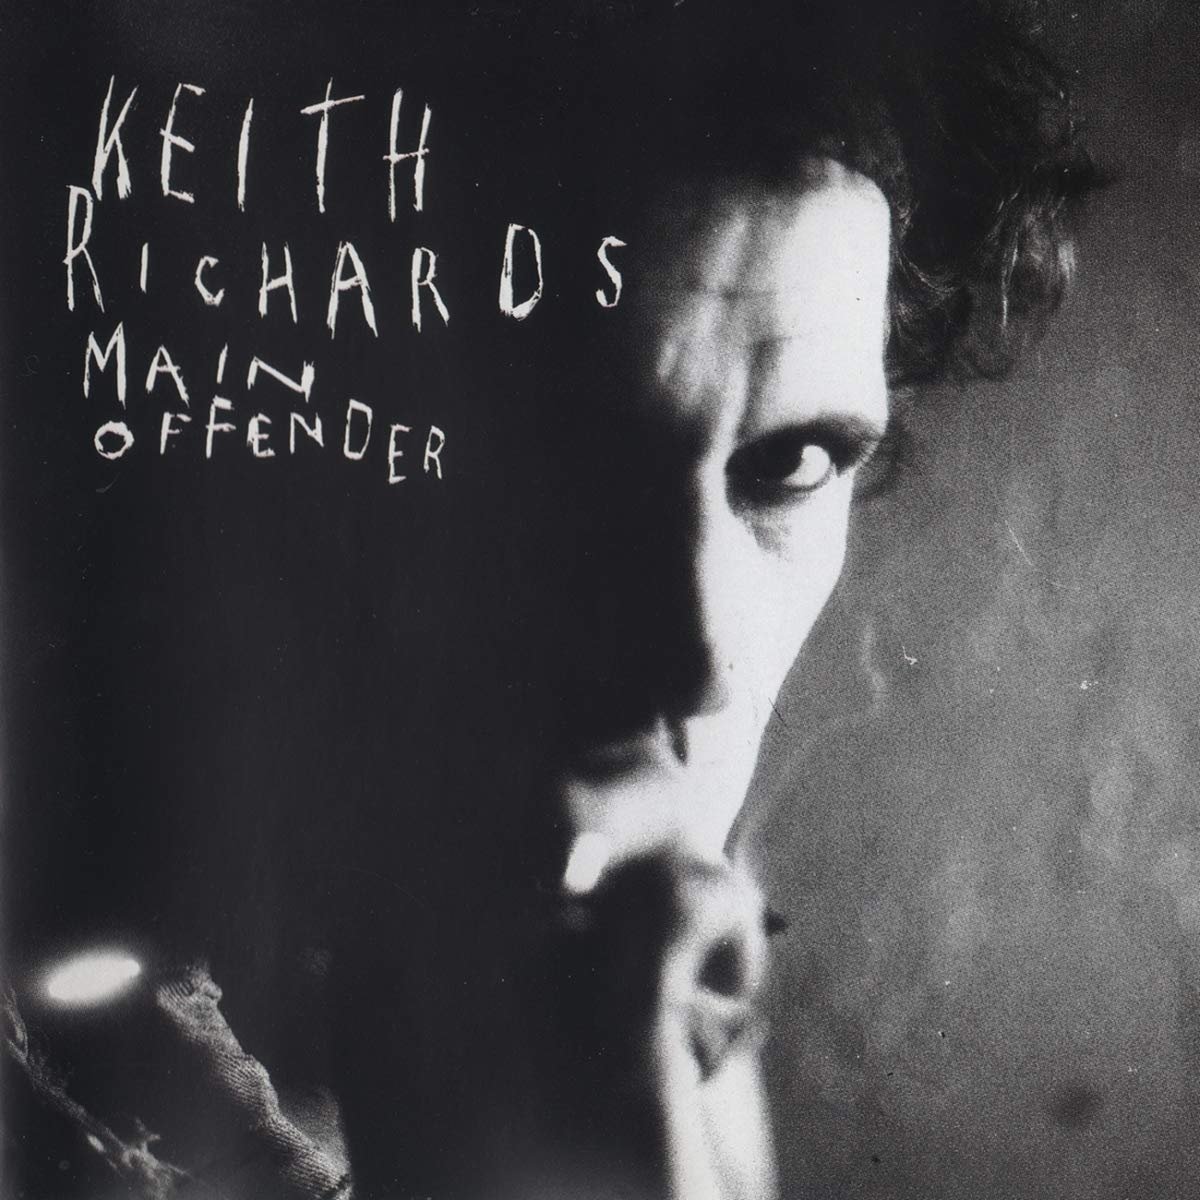 Keith Richards - Main Offender (LP) Keith Richards